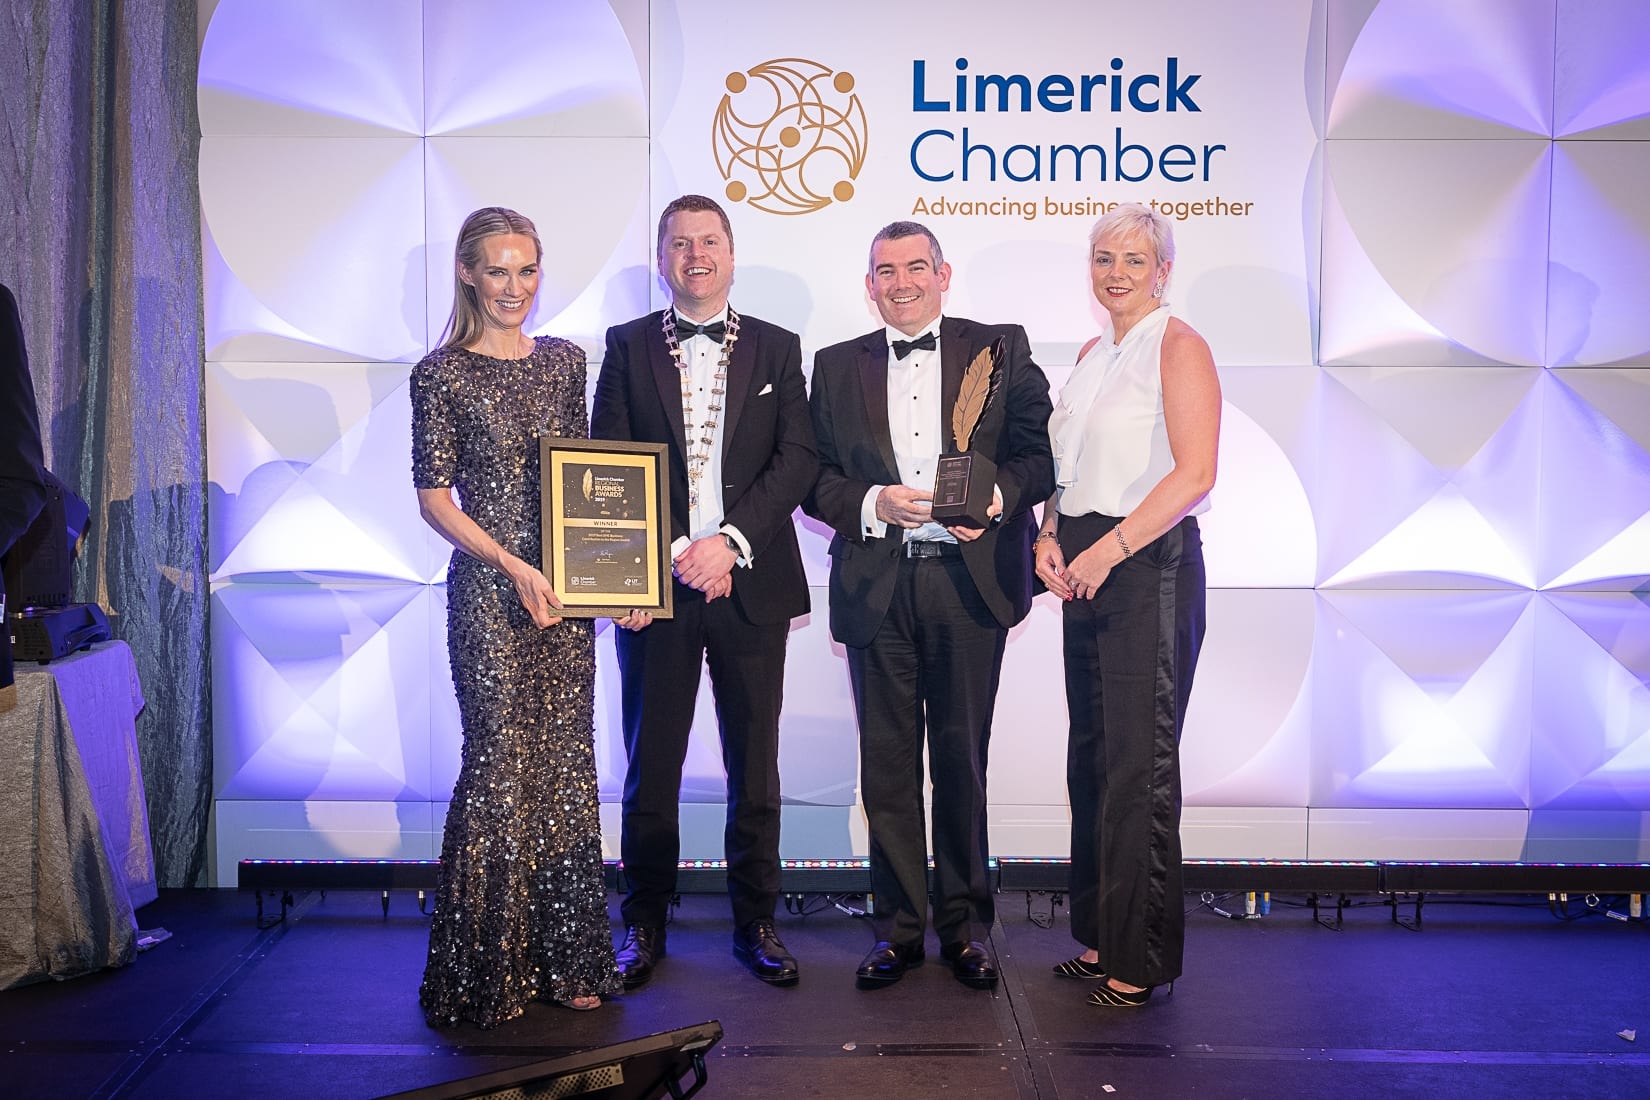 o repro fee-Limerick Chamber President’s Dinner
and Limerick Chamber Regional Business Awards 2019 which was held in the Strand Hotel on Friday 15th November /Best SME /  - From Left to Right: Dee Ryan - CEO Limerick Chamber, Eoin Ryan - President Limerick Chamber, Mark O’Connor - WINNER / 4Site, Hilary Gormley - AIB / Sponsor 
Photo credit Shauna Kennedy